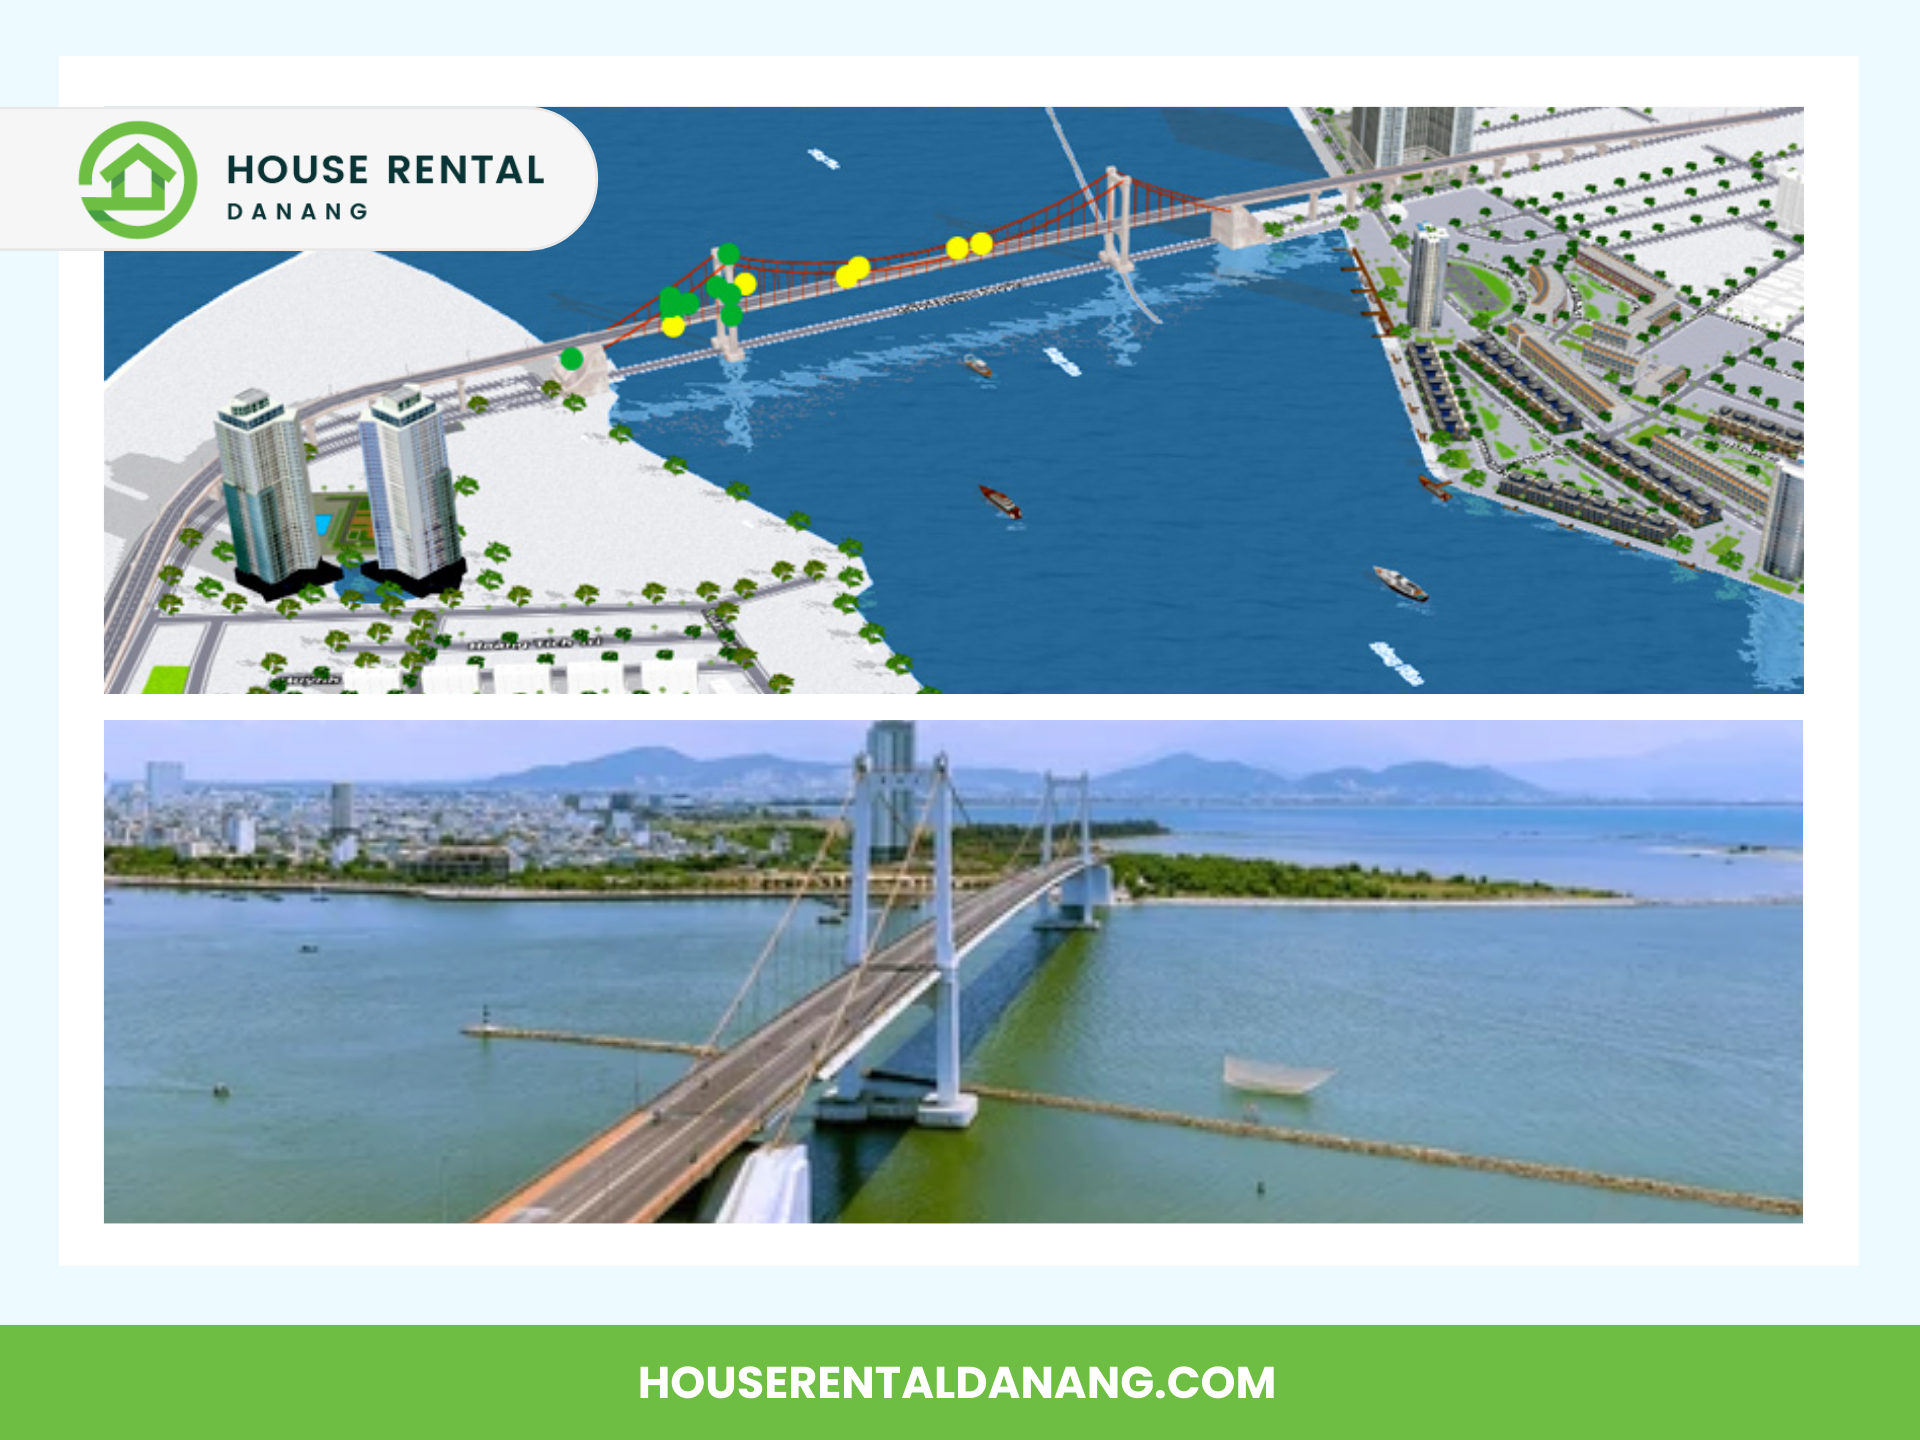 Two images of Thuan Phuoc Bridge are shown, one as a rendered graphic with a top-down view and the other as a real-life photo of the bridge spanning a body of water. Text reads "House Rental Danang.